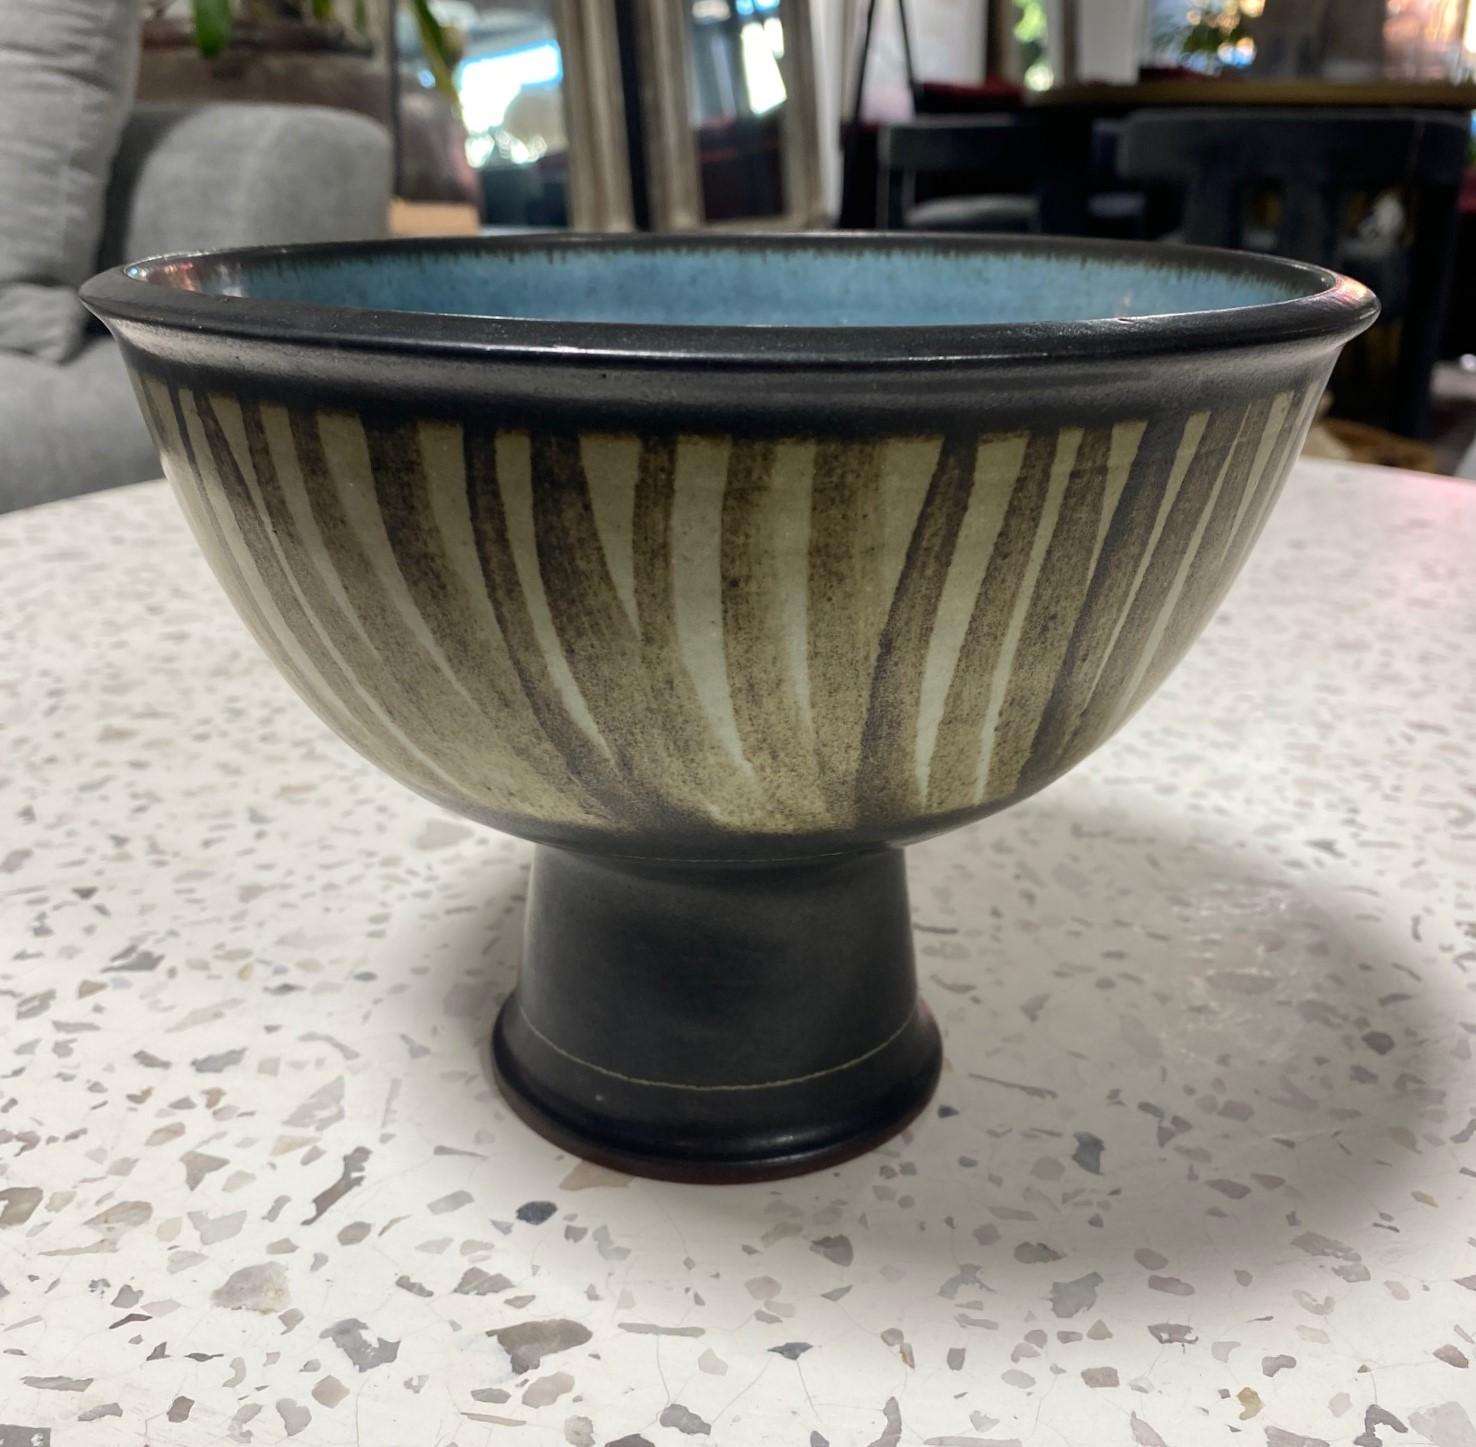 An exquisitely designed and decorated large striped pedestal bowl by renowned American West Coast Californian master ceramist/potter Harrison Mcintosh who was famed for his Mid-Century Modern style of ceramics.

Mcintosh's works have been